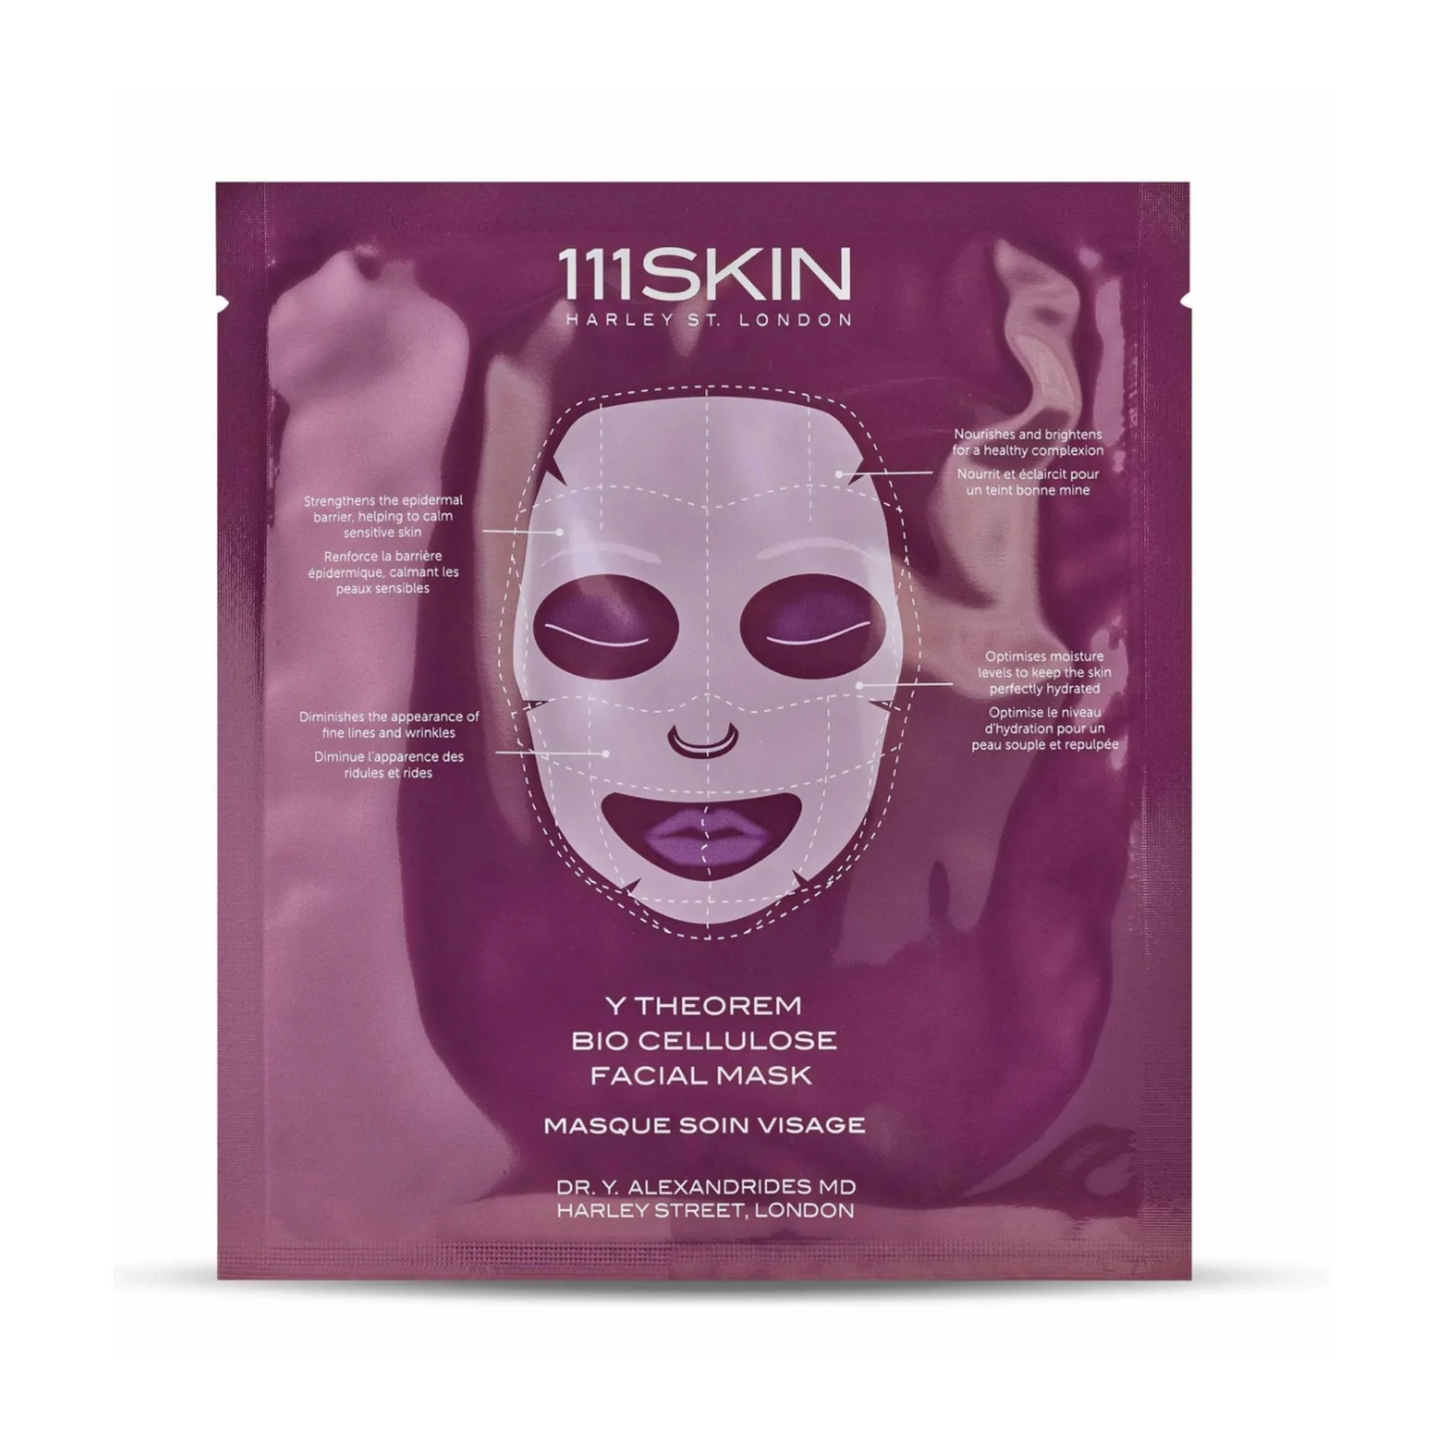 Y Theorem Bio Cellulose Facial Mask: Calming Mask for Stressed Skin